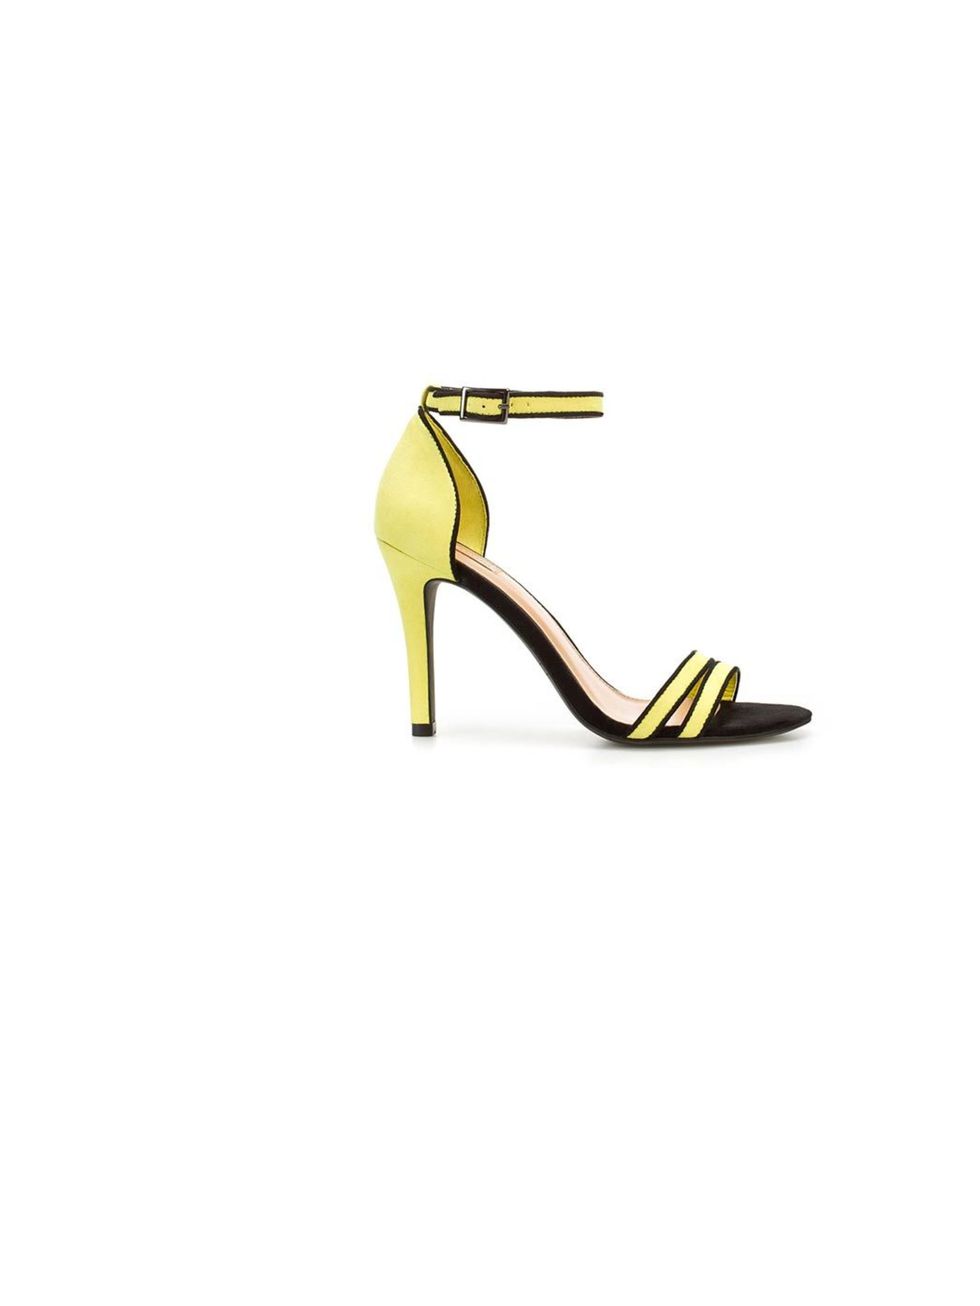 <p>Zara statement sandals, £25.99, for stockists call, 0207 534 9500</p>